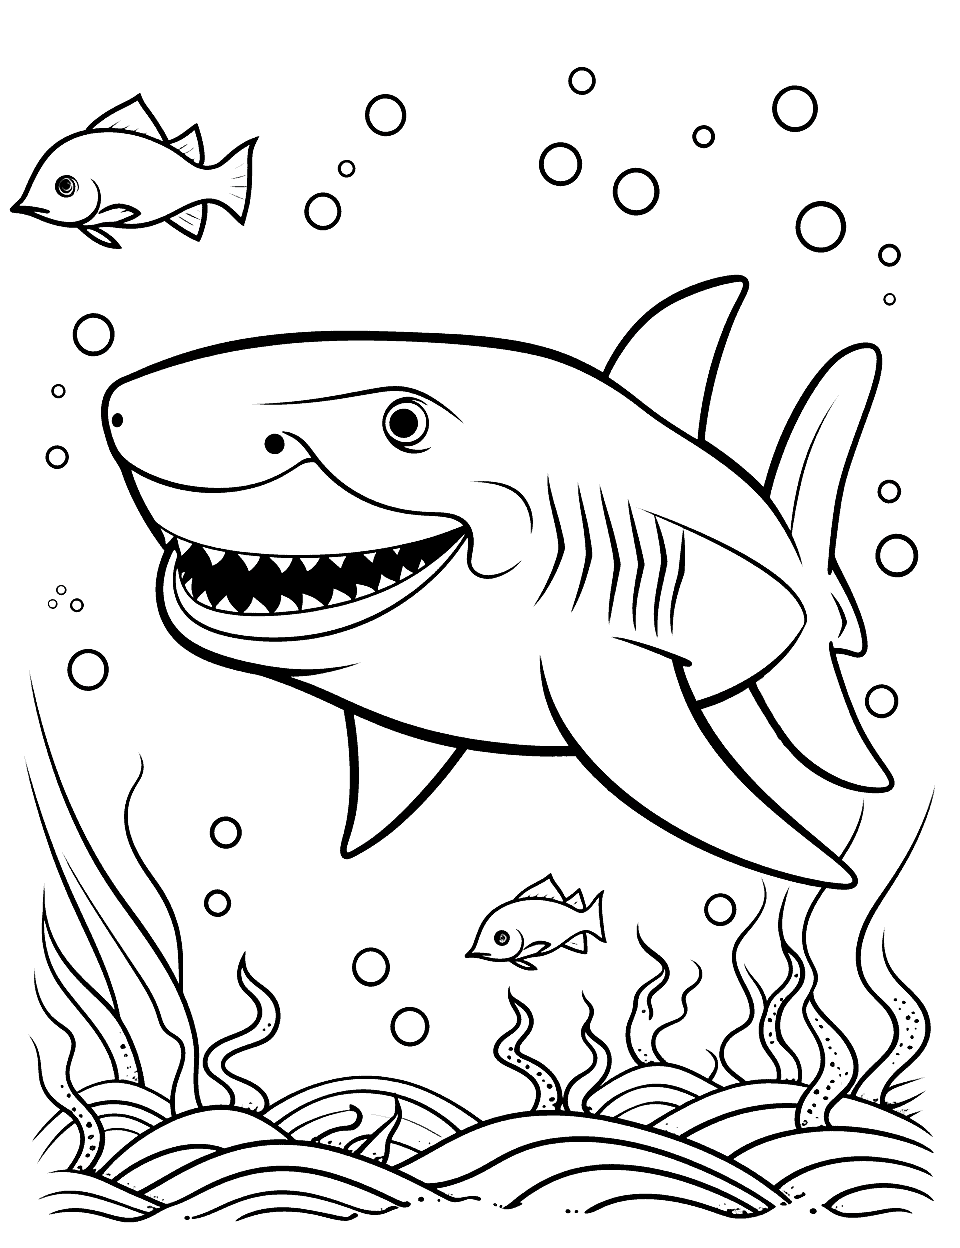 Leopard Shark and Starfish Coloring Page - A scene of a leopard shark swimming around starfish and other sea creatures.